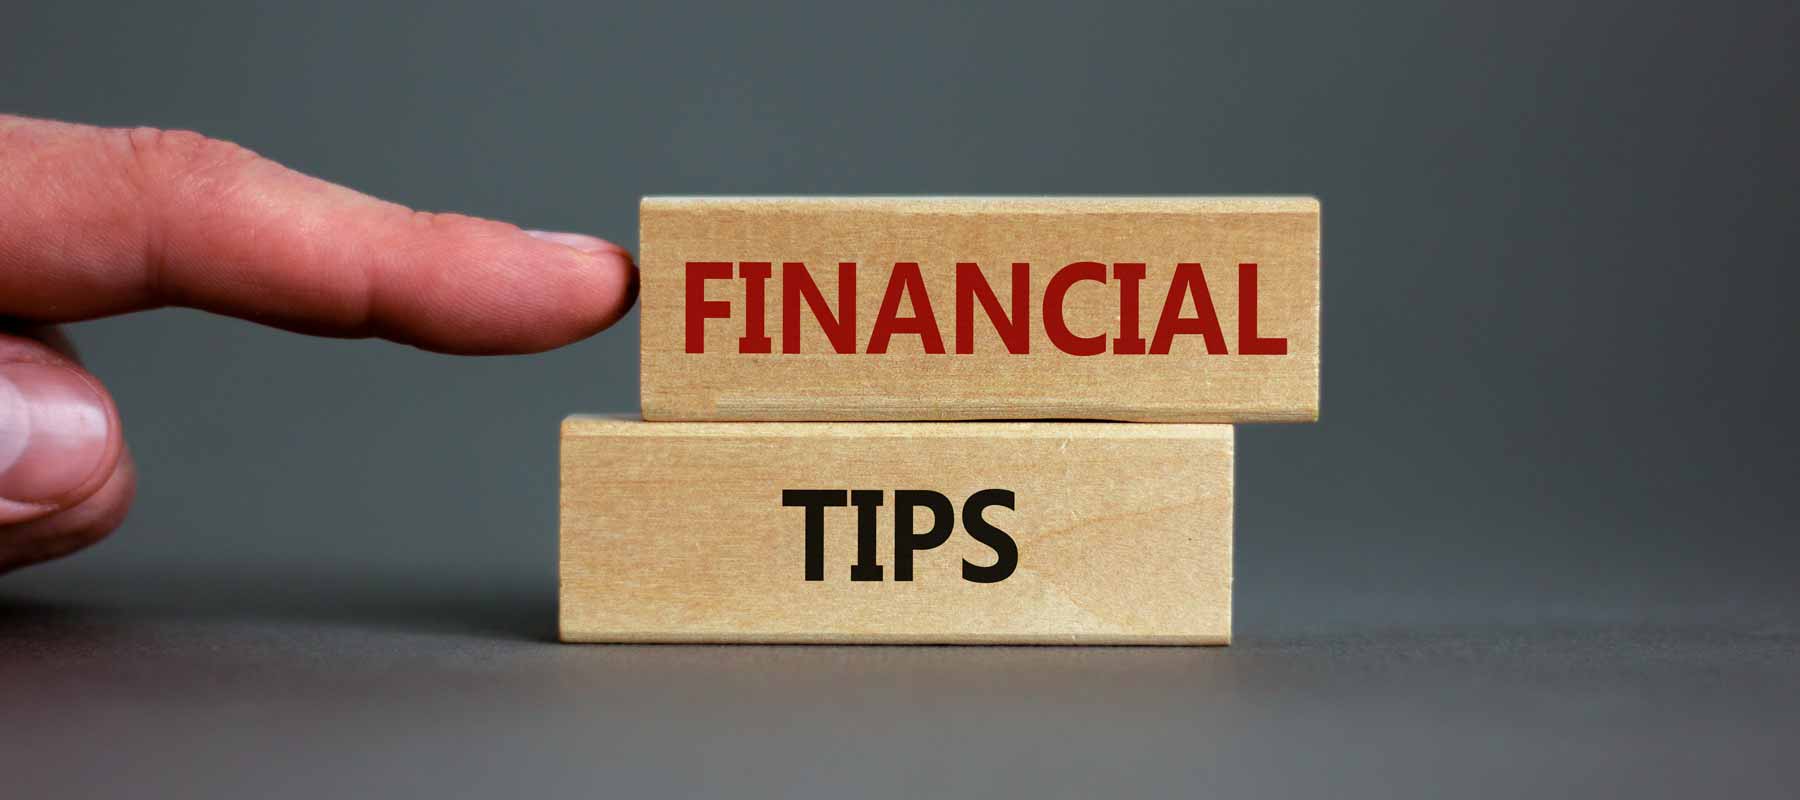 7 Financial Tips From Jason Noble